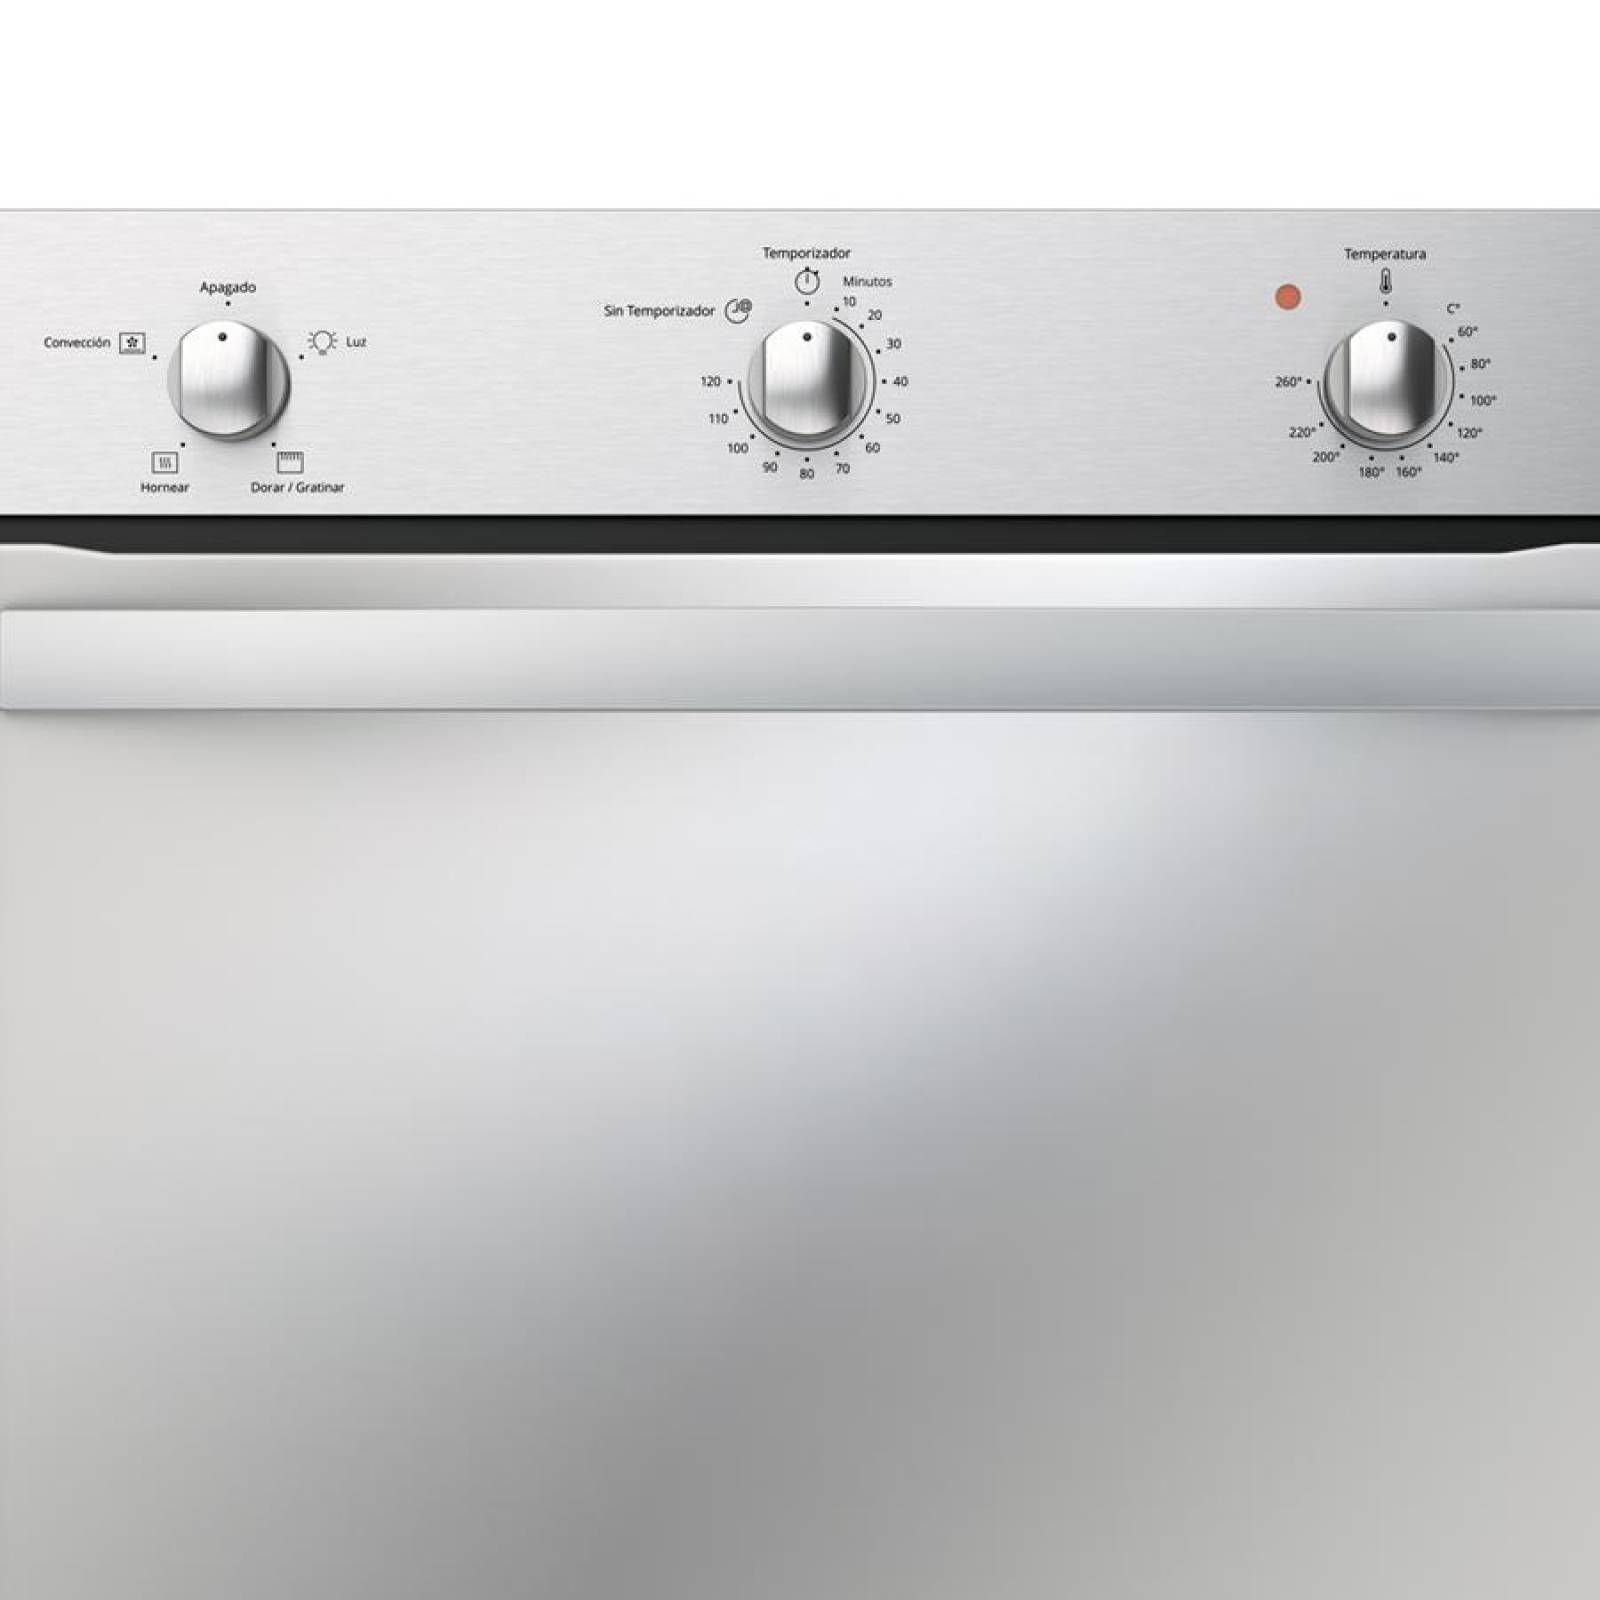 Horno Electrico Empotrable Whirlpool WOE120S 60 Cms Acero Inoxidable